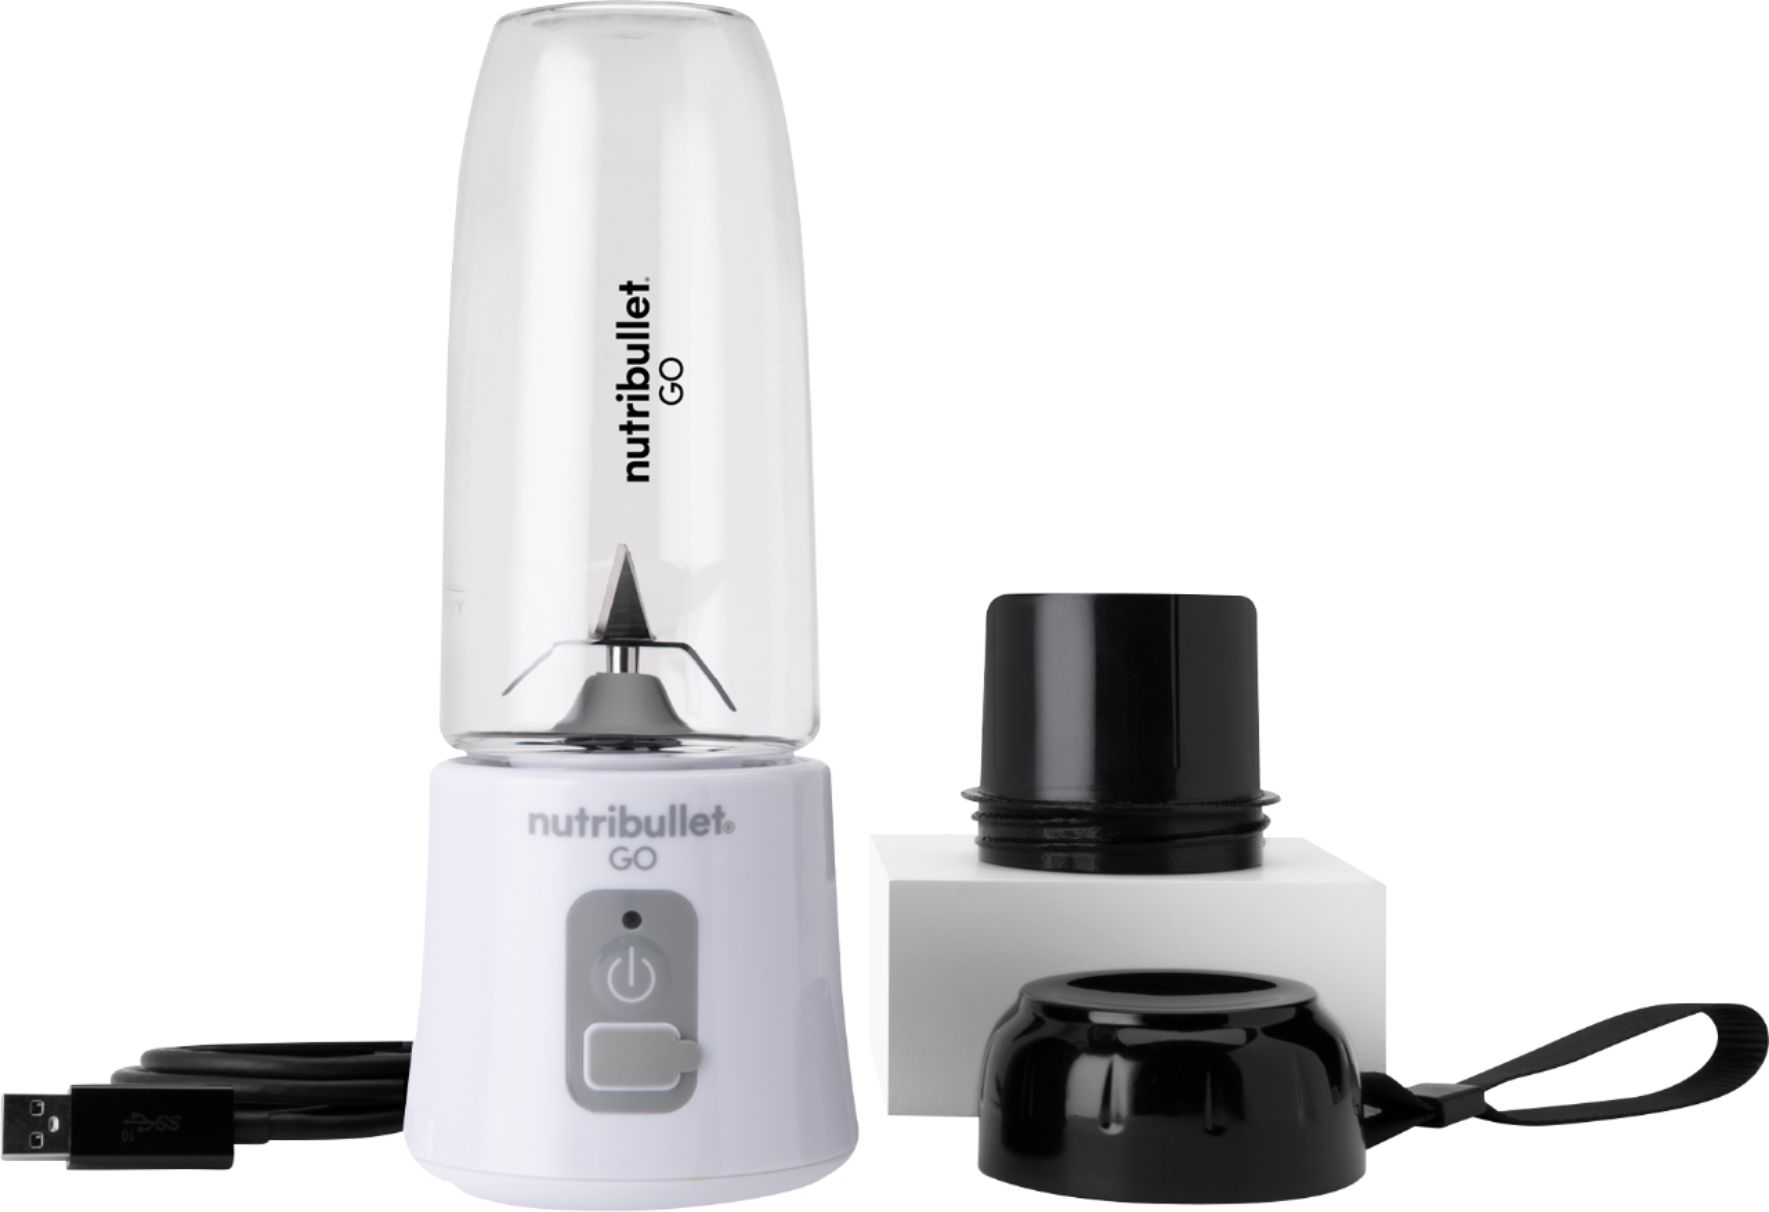 Nutribullet go review: A compact blender that doesn't pack much